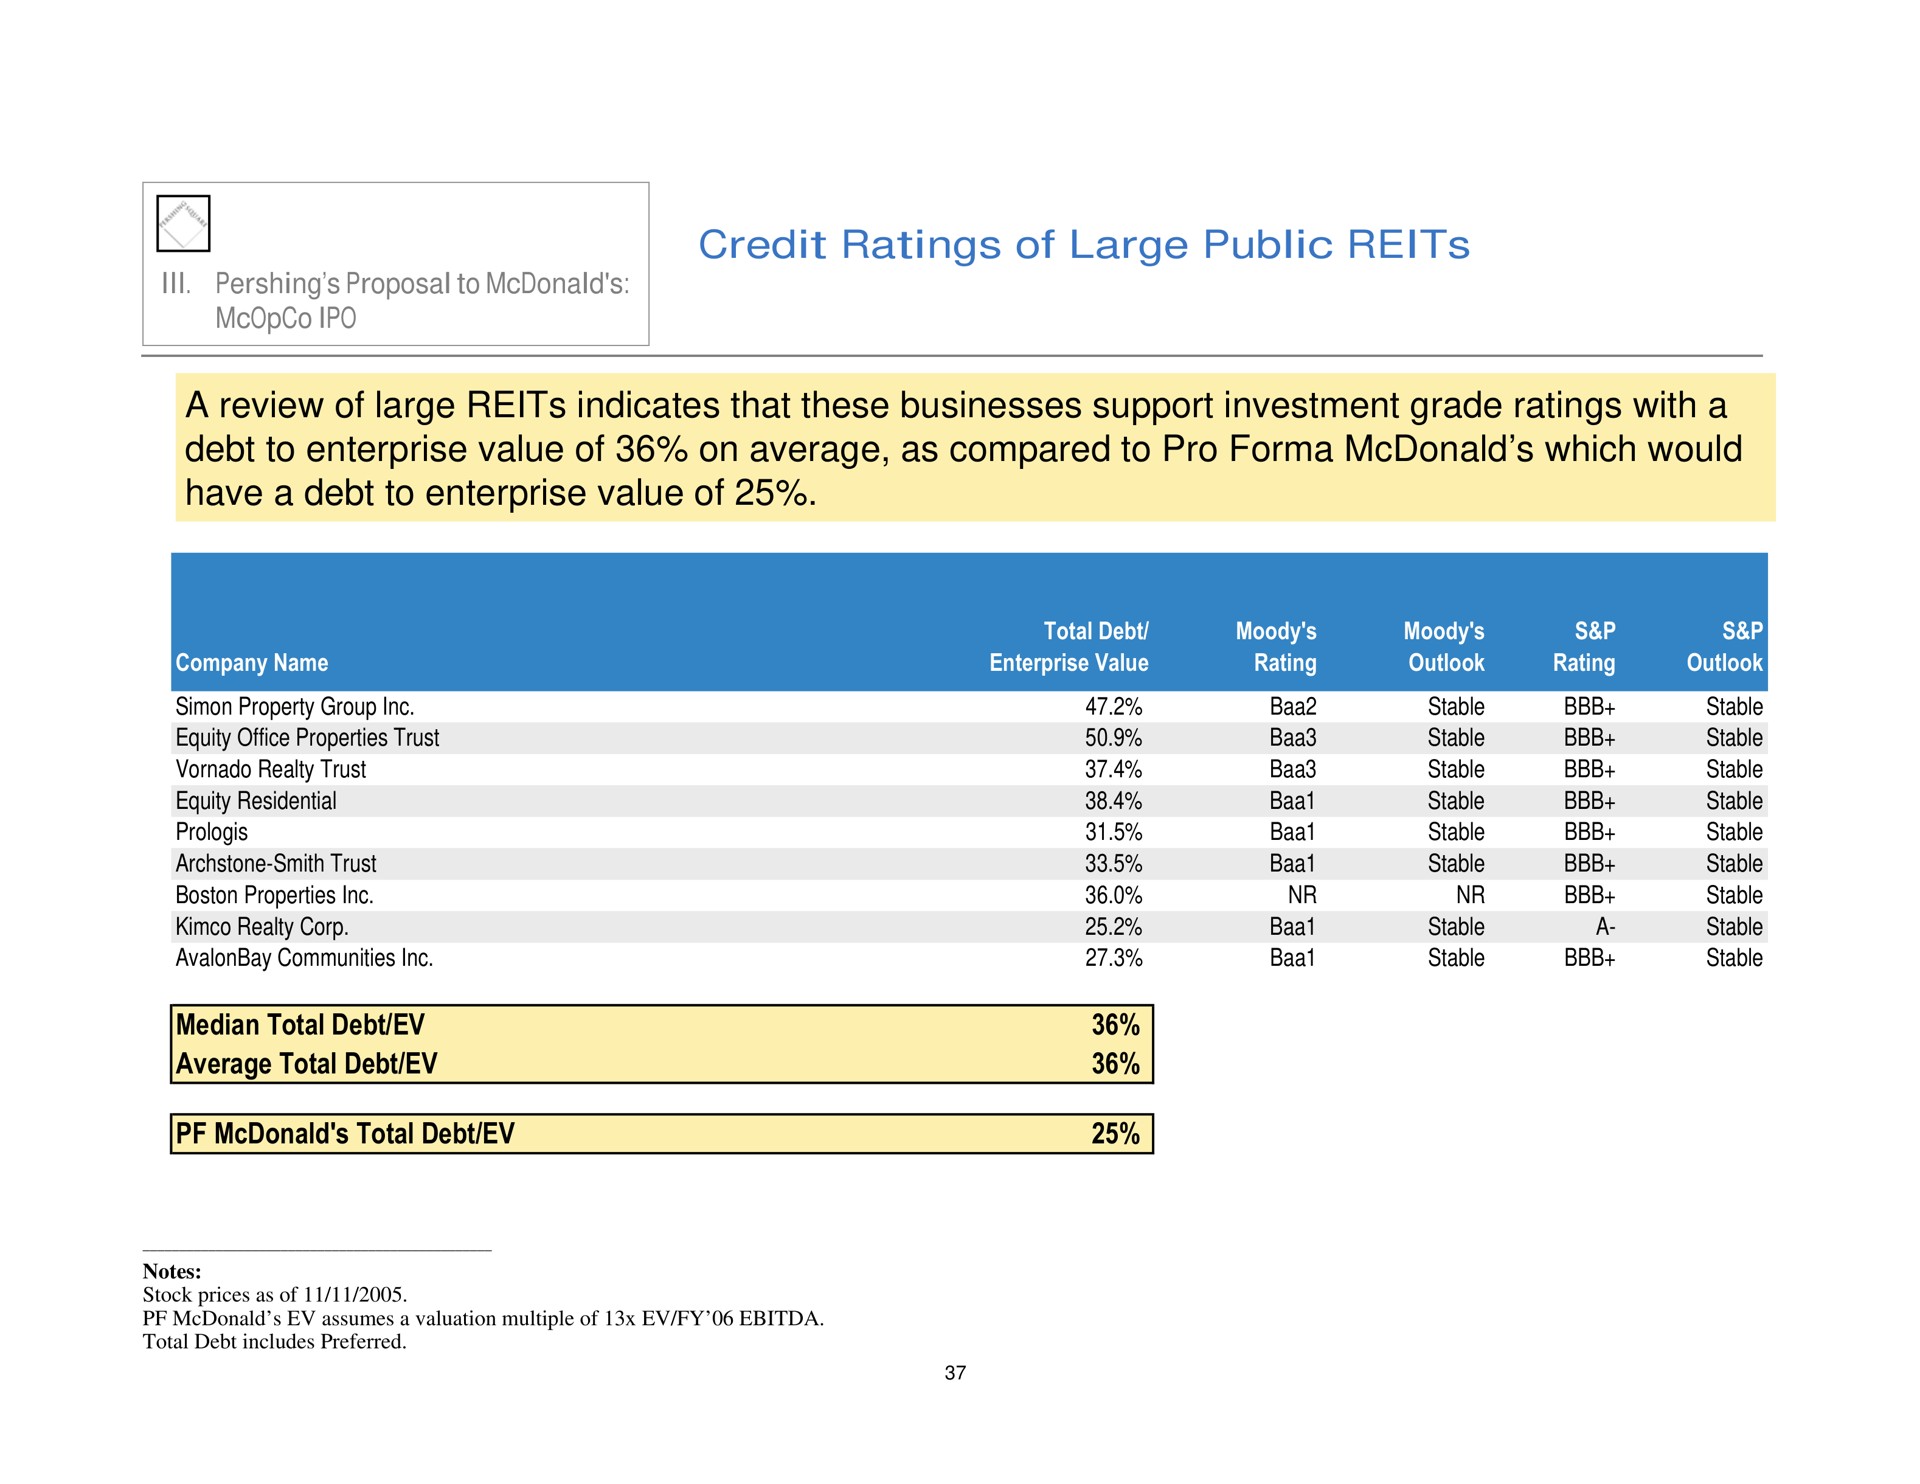 credit ratings of large public reits a review of large reits indicates that these businesses support investment grade ratings with a debt to enterprise value of on average as compared to pro which would have a debt to enterprise value of | Pershing Square